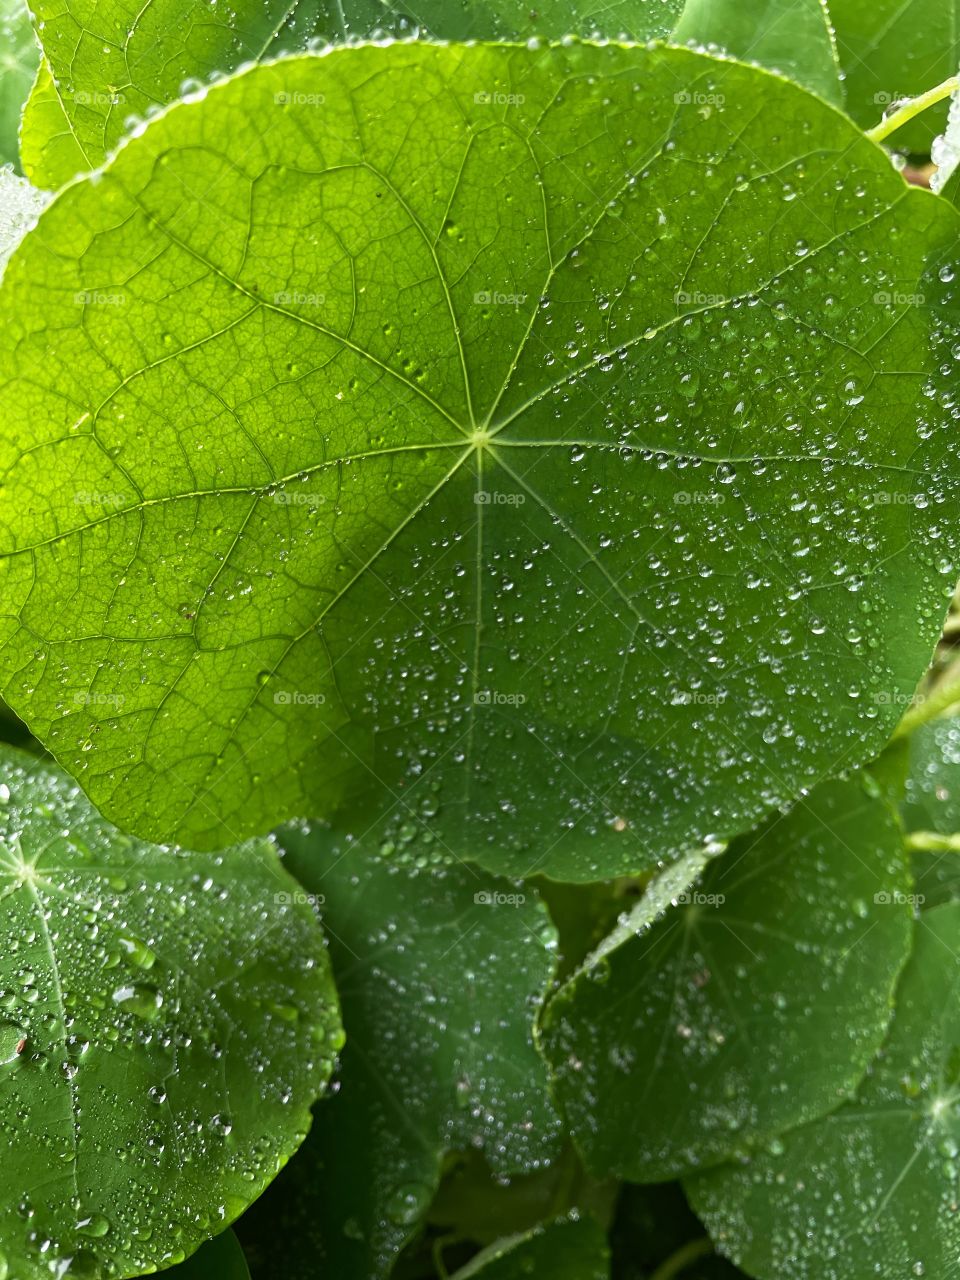 Leaf rainfall green raindrops waterdrops droplets wet water rain drop outside nature outdoors elements dew dewdrops plant plants leafs Grass splashes phone photography